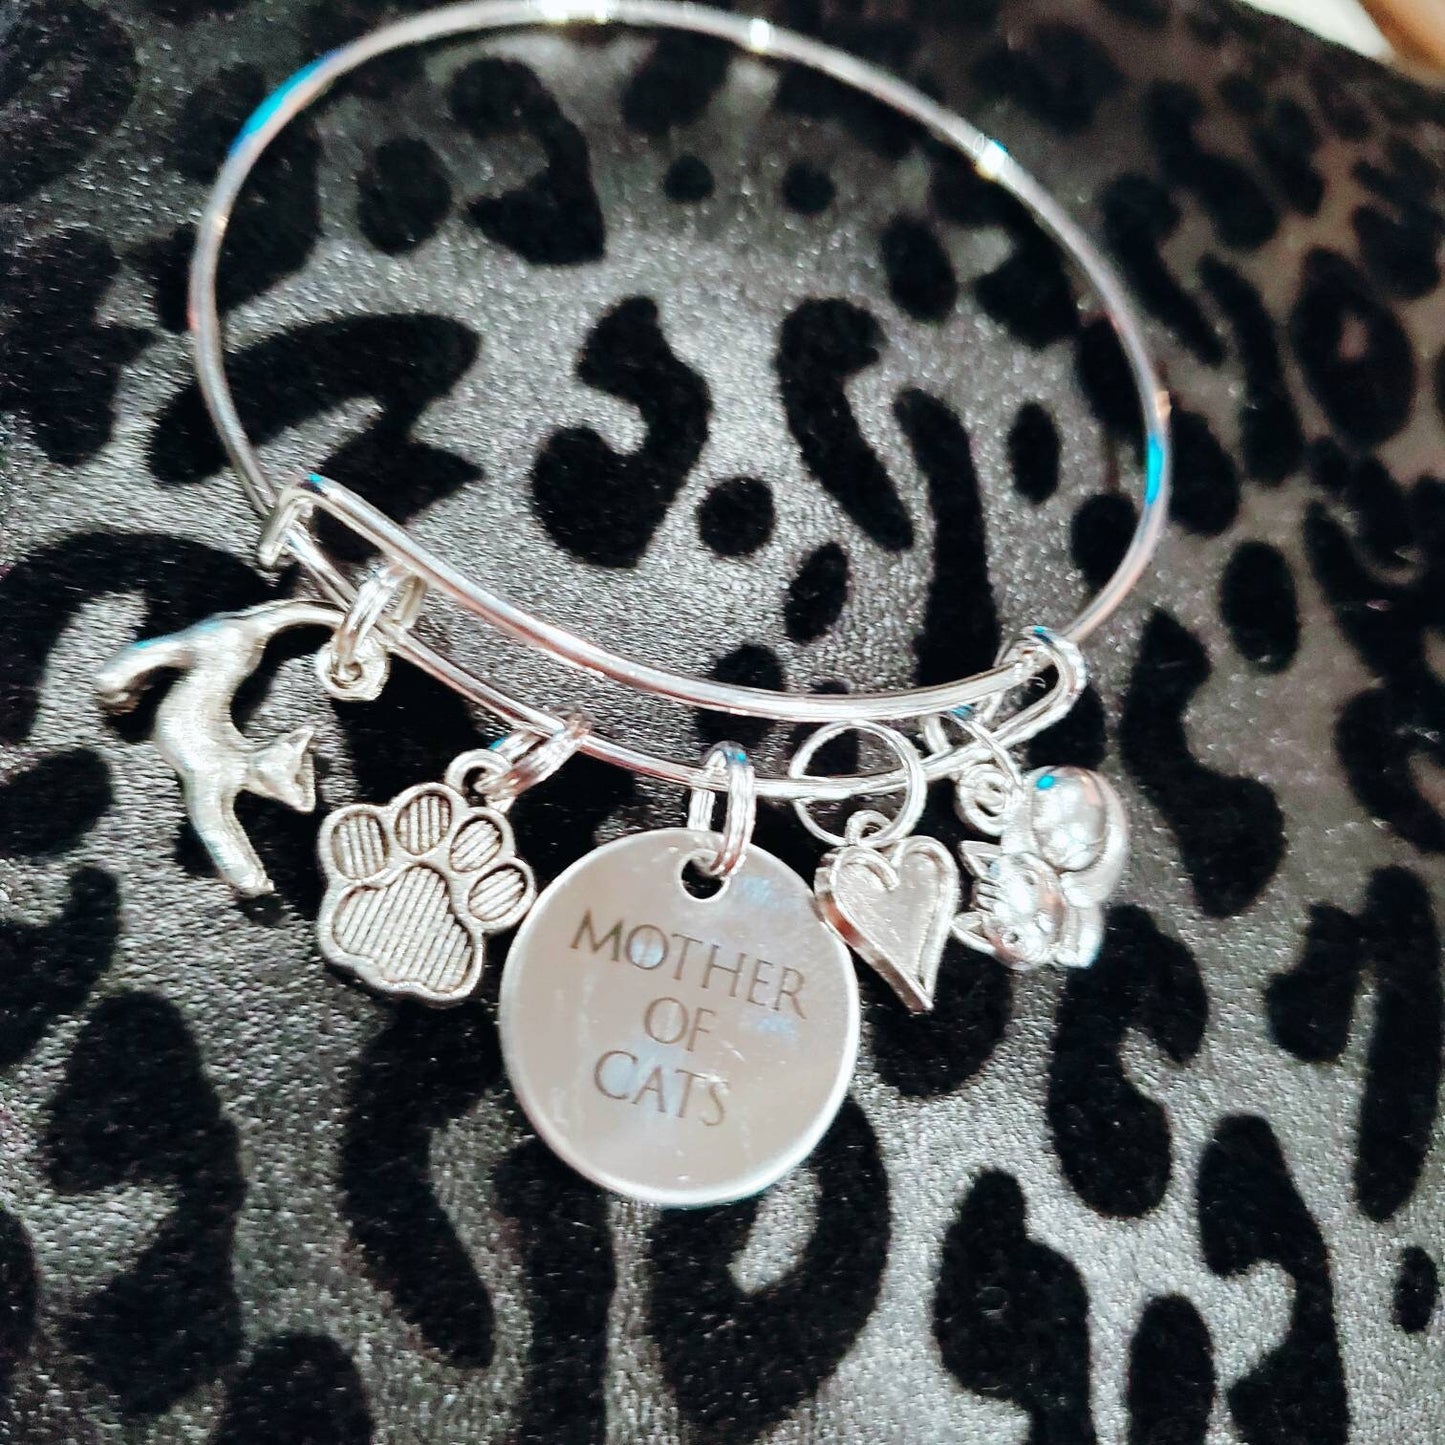 Mother of Cats Adjustable Charm Bangle